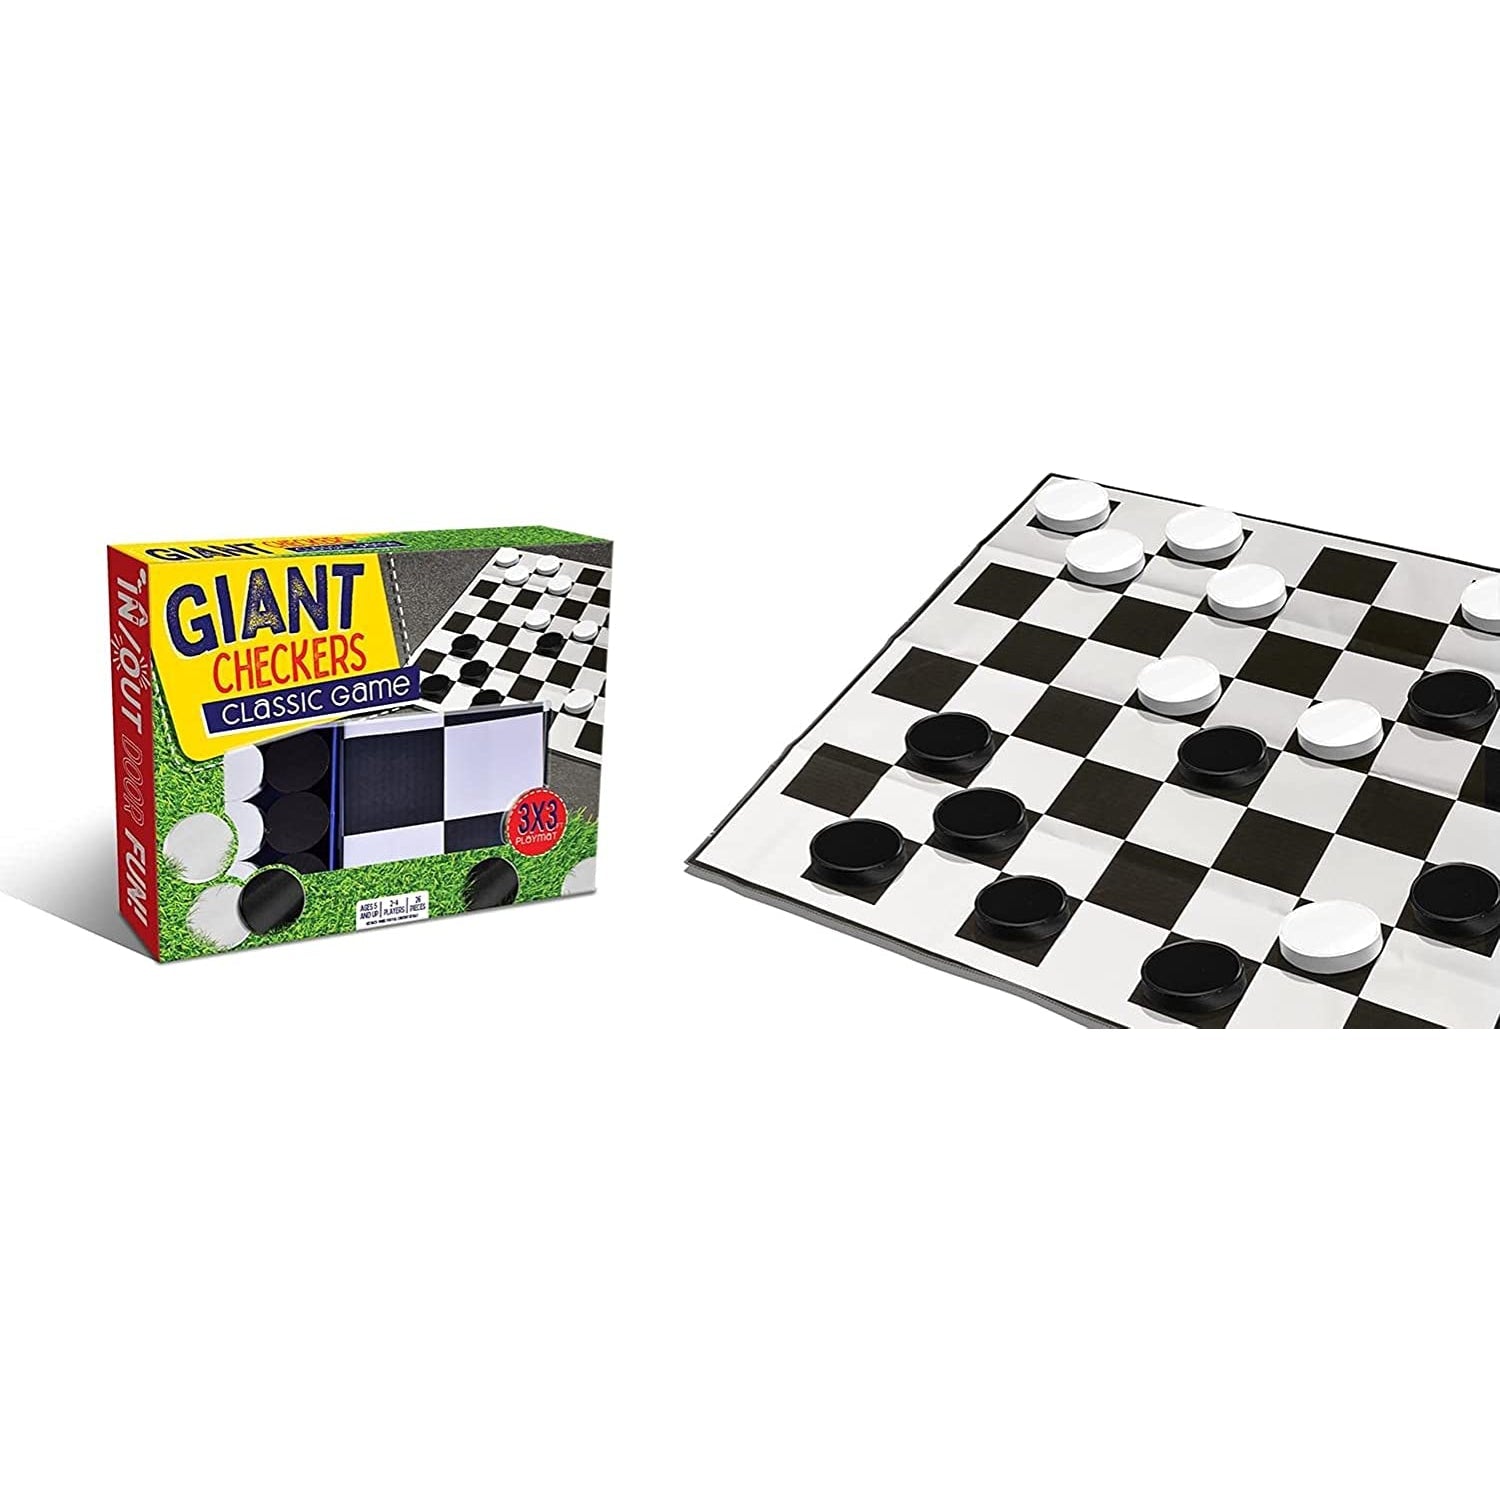 Anker Play Giant Checkers Classic Game-Anker Play Products-Little Giant Kidz